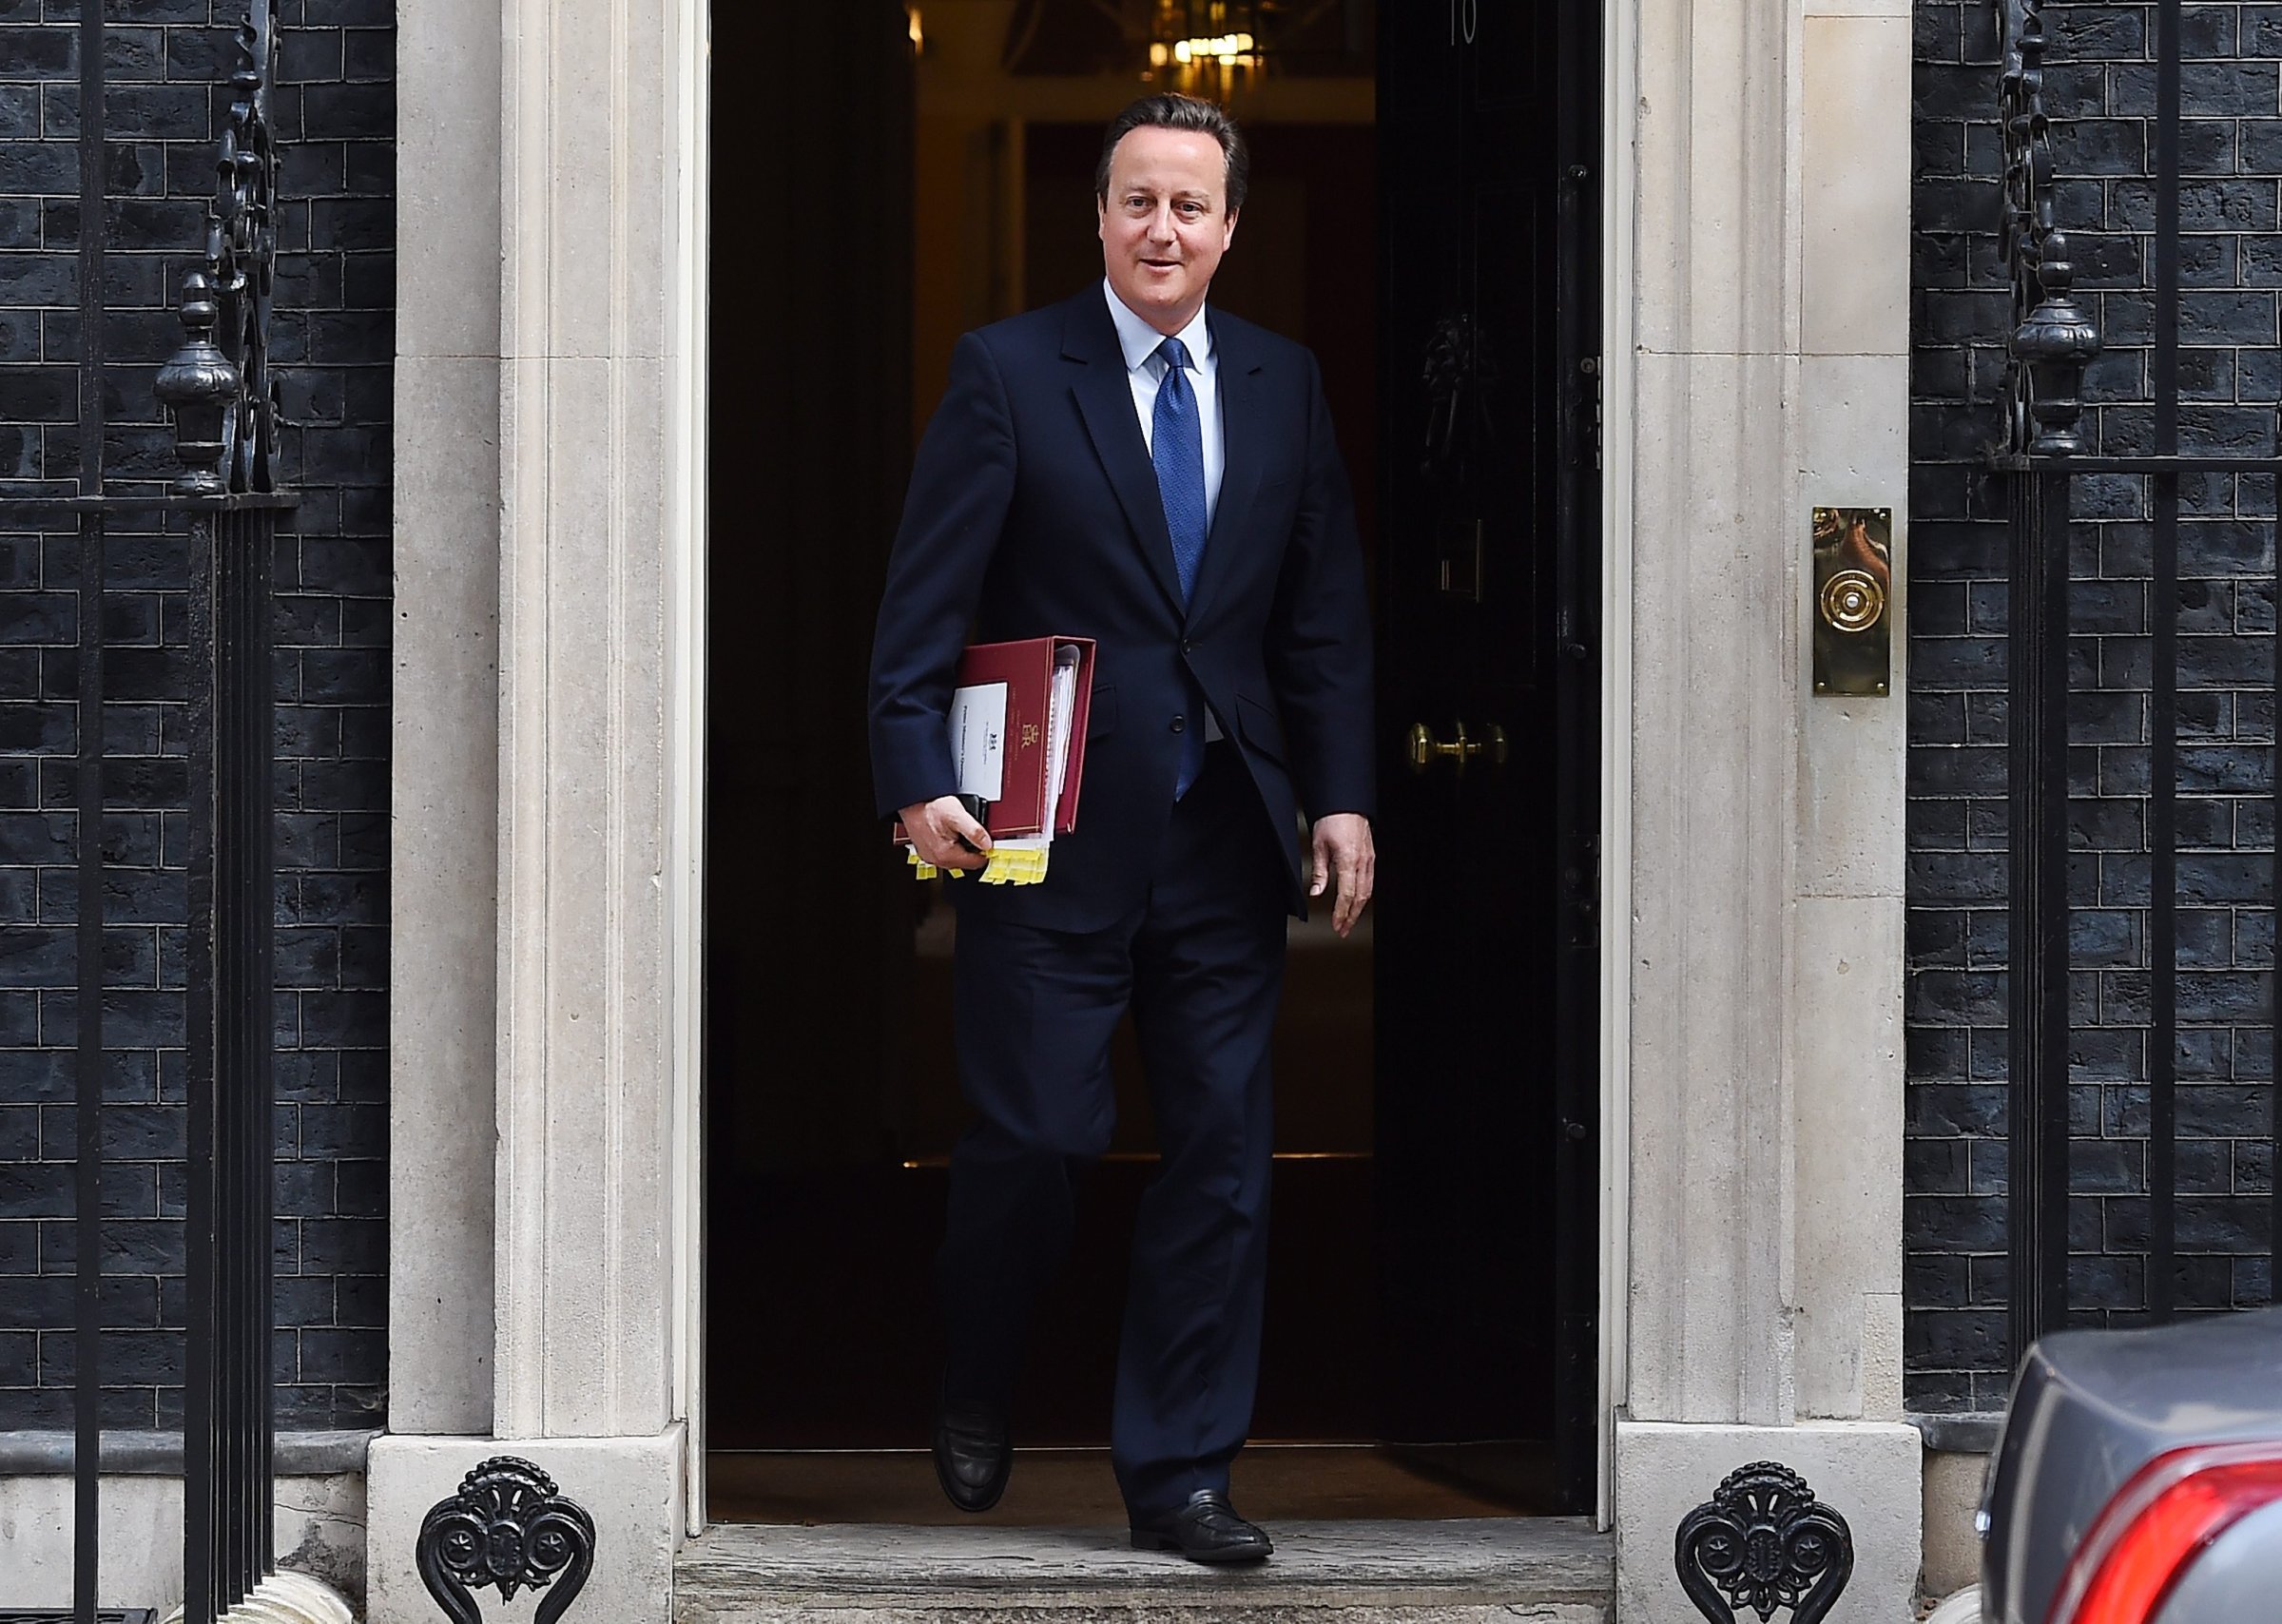 British Prime Minister David Cameron departs 10 Downing Street for his last Prime Minister's Questions in the House of Commons, Westminister, London on July 13, 2016.